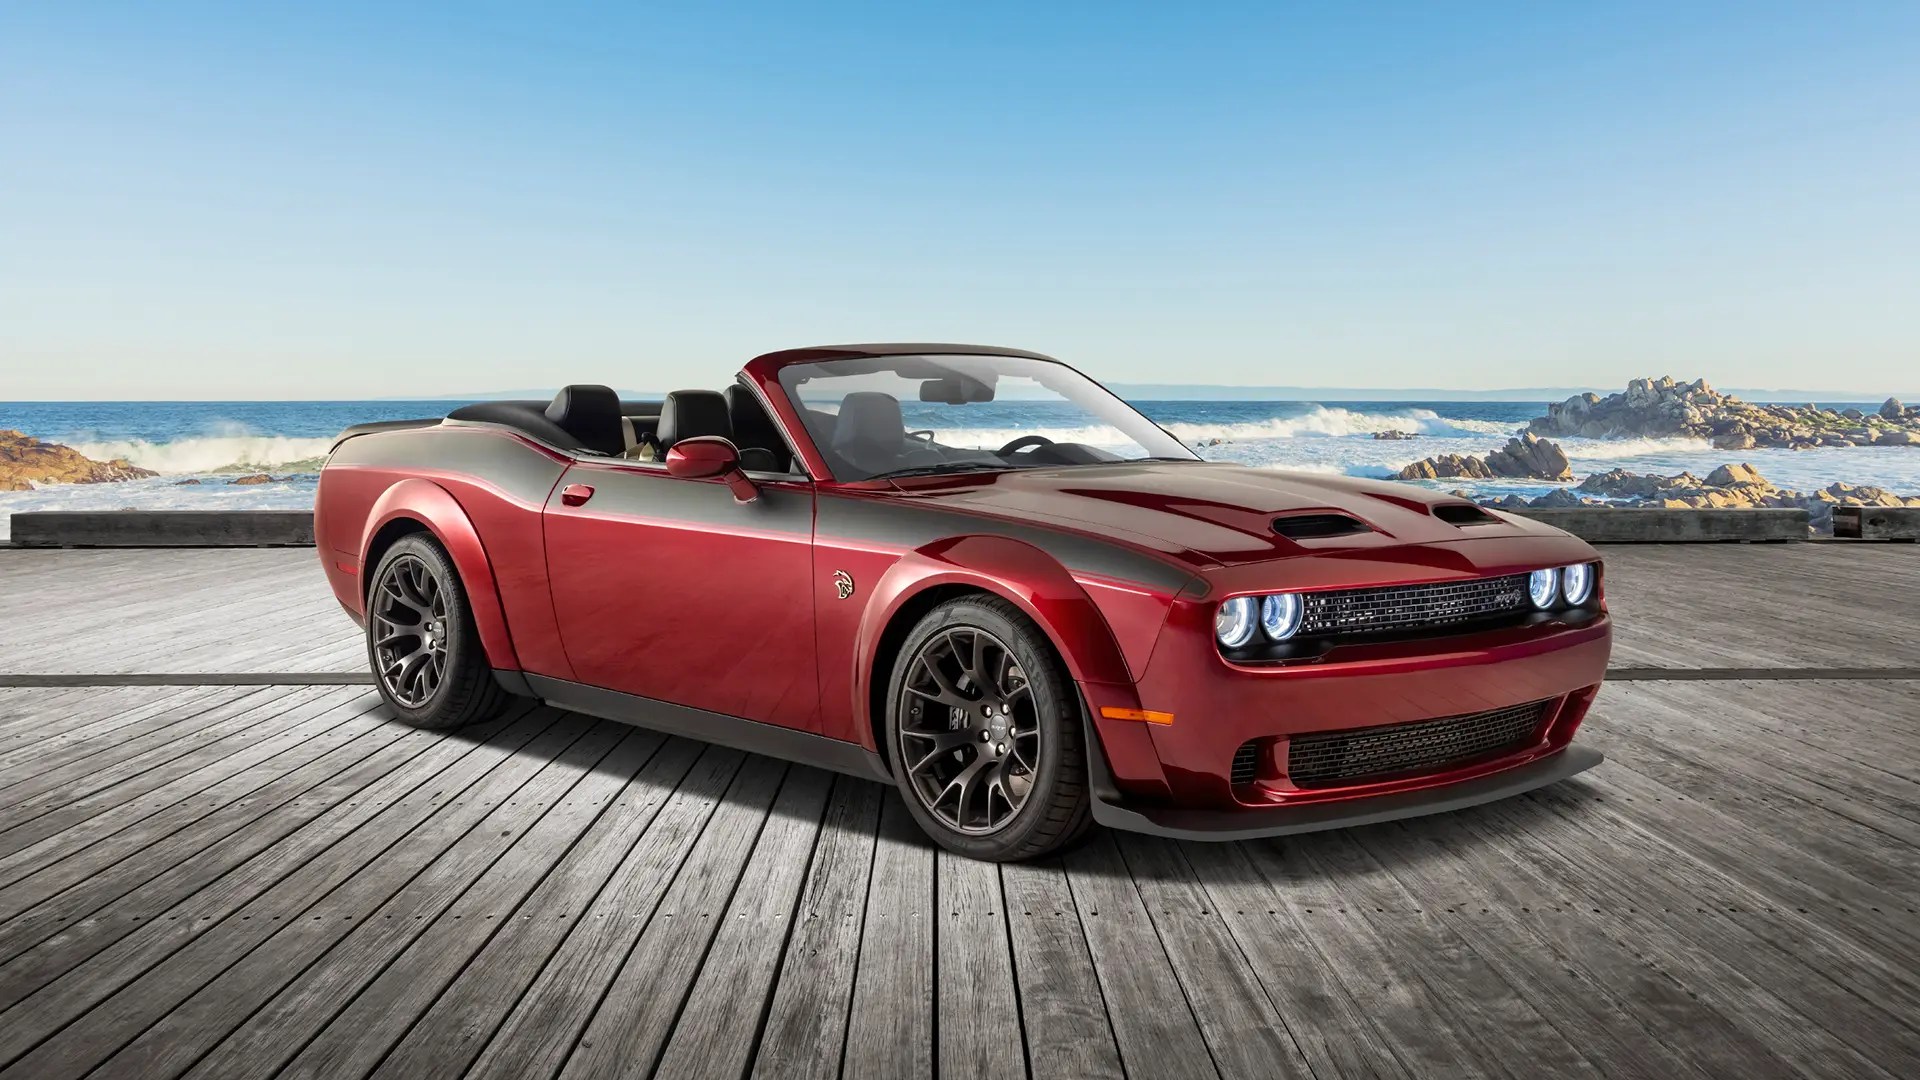 Official: Dodge Begins Selling Convertible Challenger Today